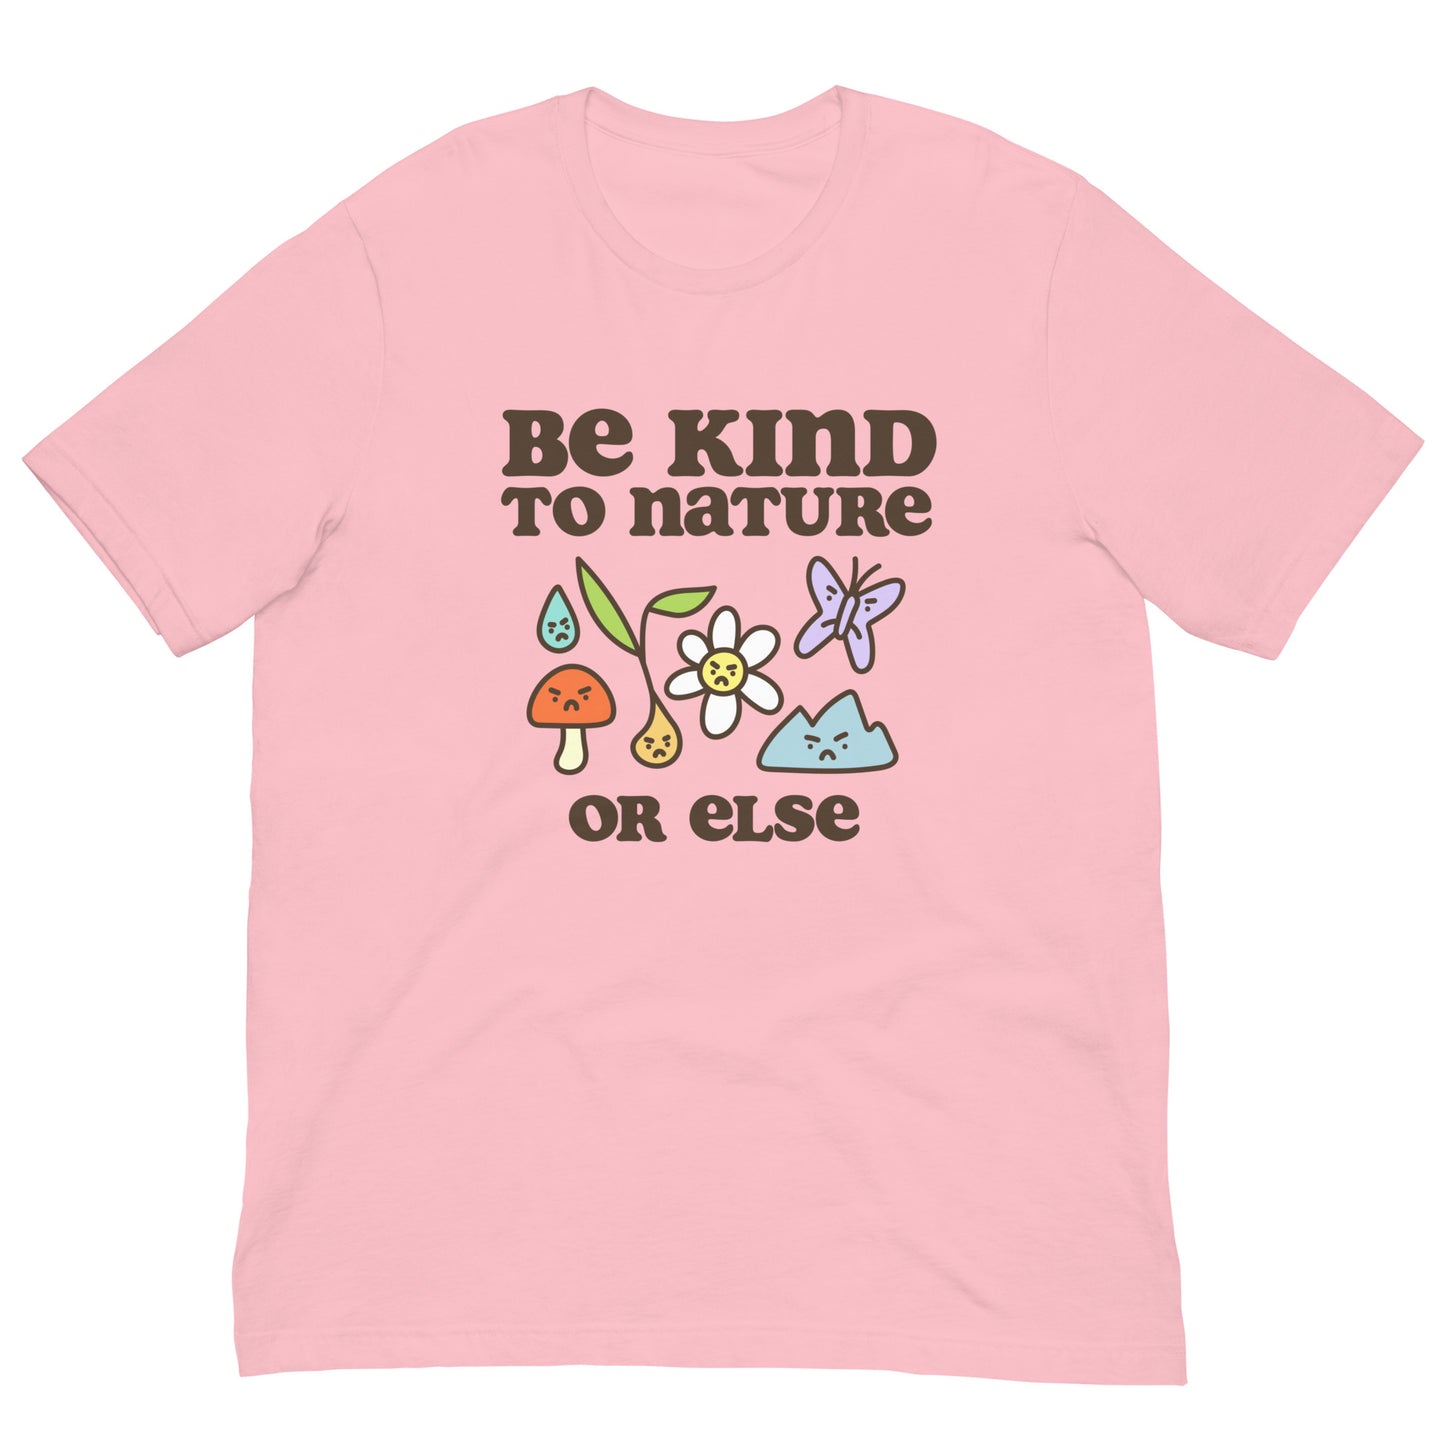 Be Kind to Nature Or Else Printed Unisex t-shirt